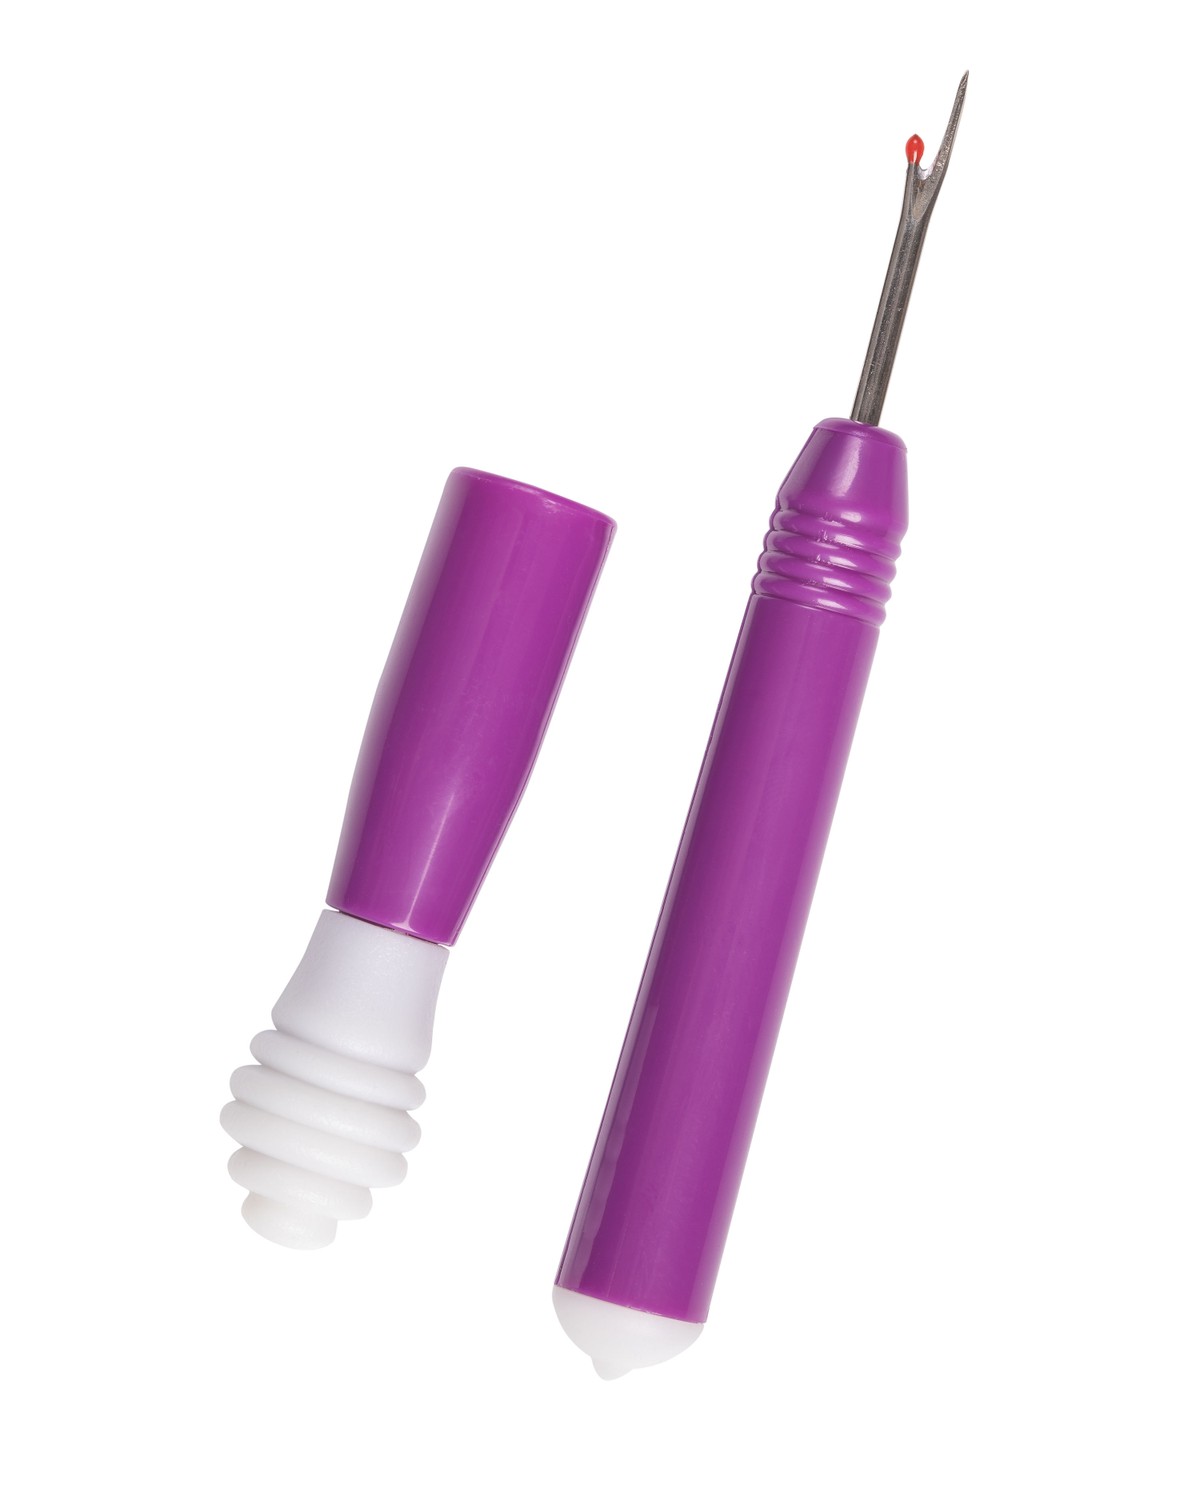 Buy the best gifts Dritz Seam Fix Seam Ripper, Pink for Dad Mom